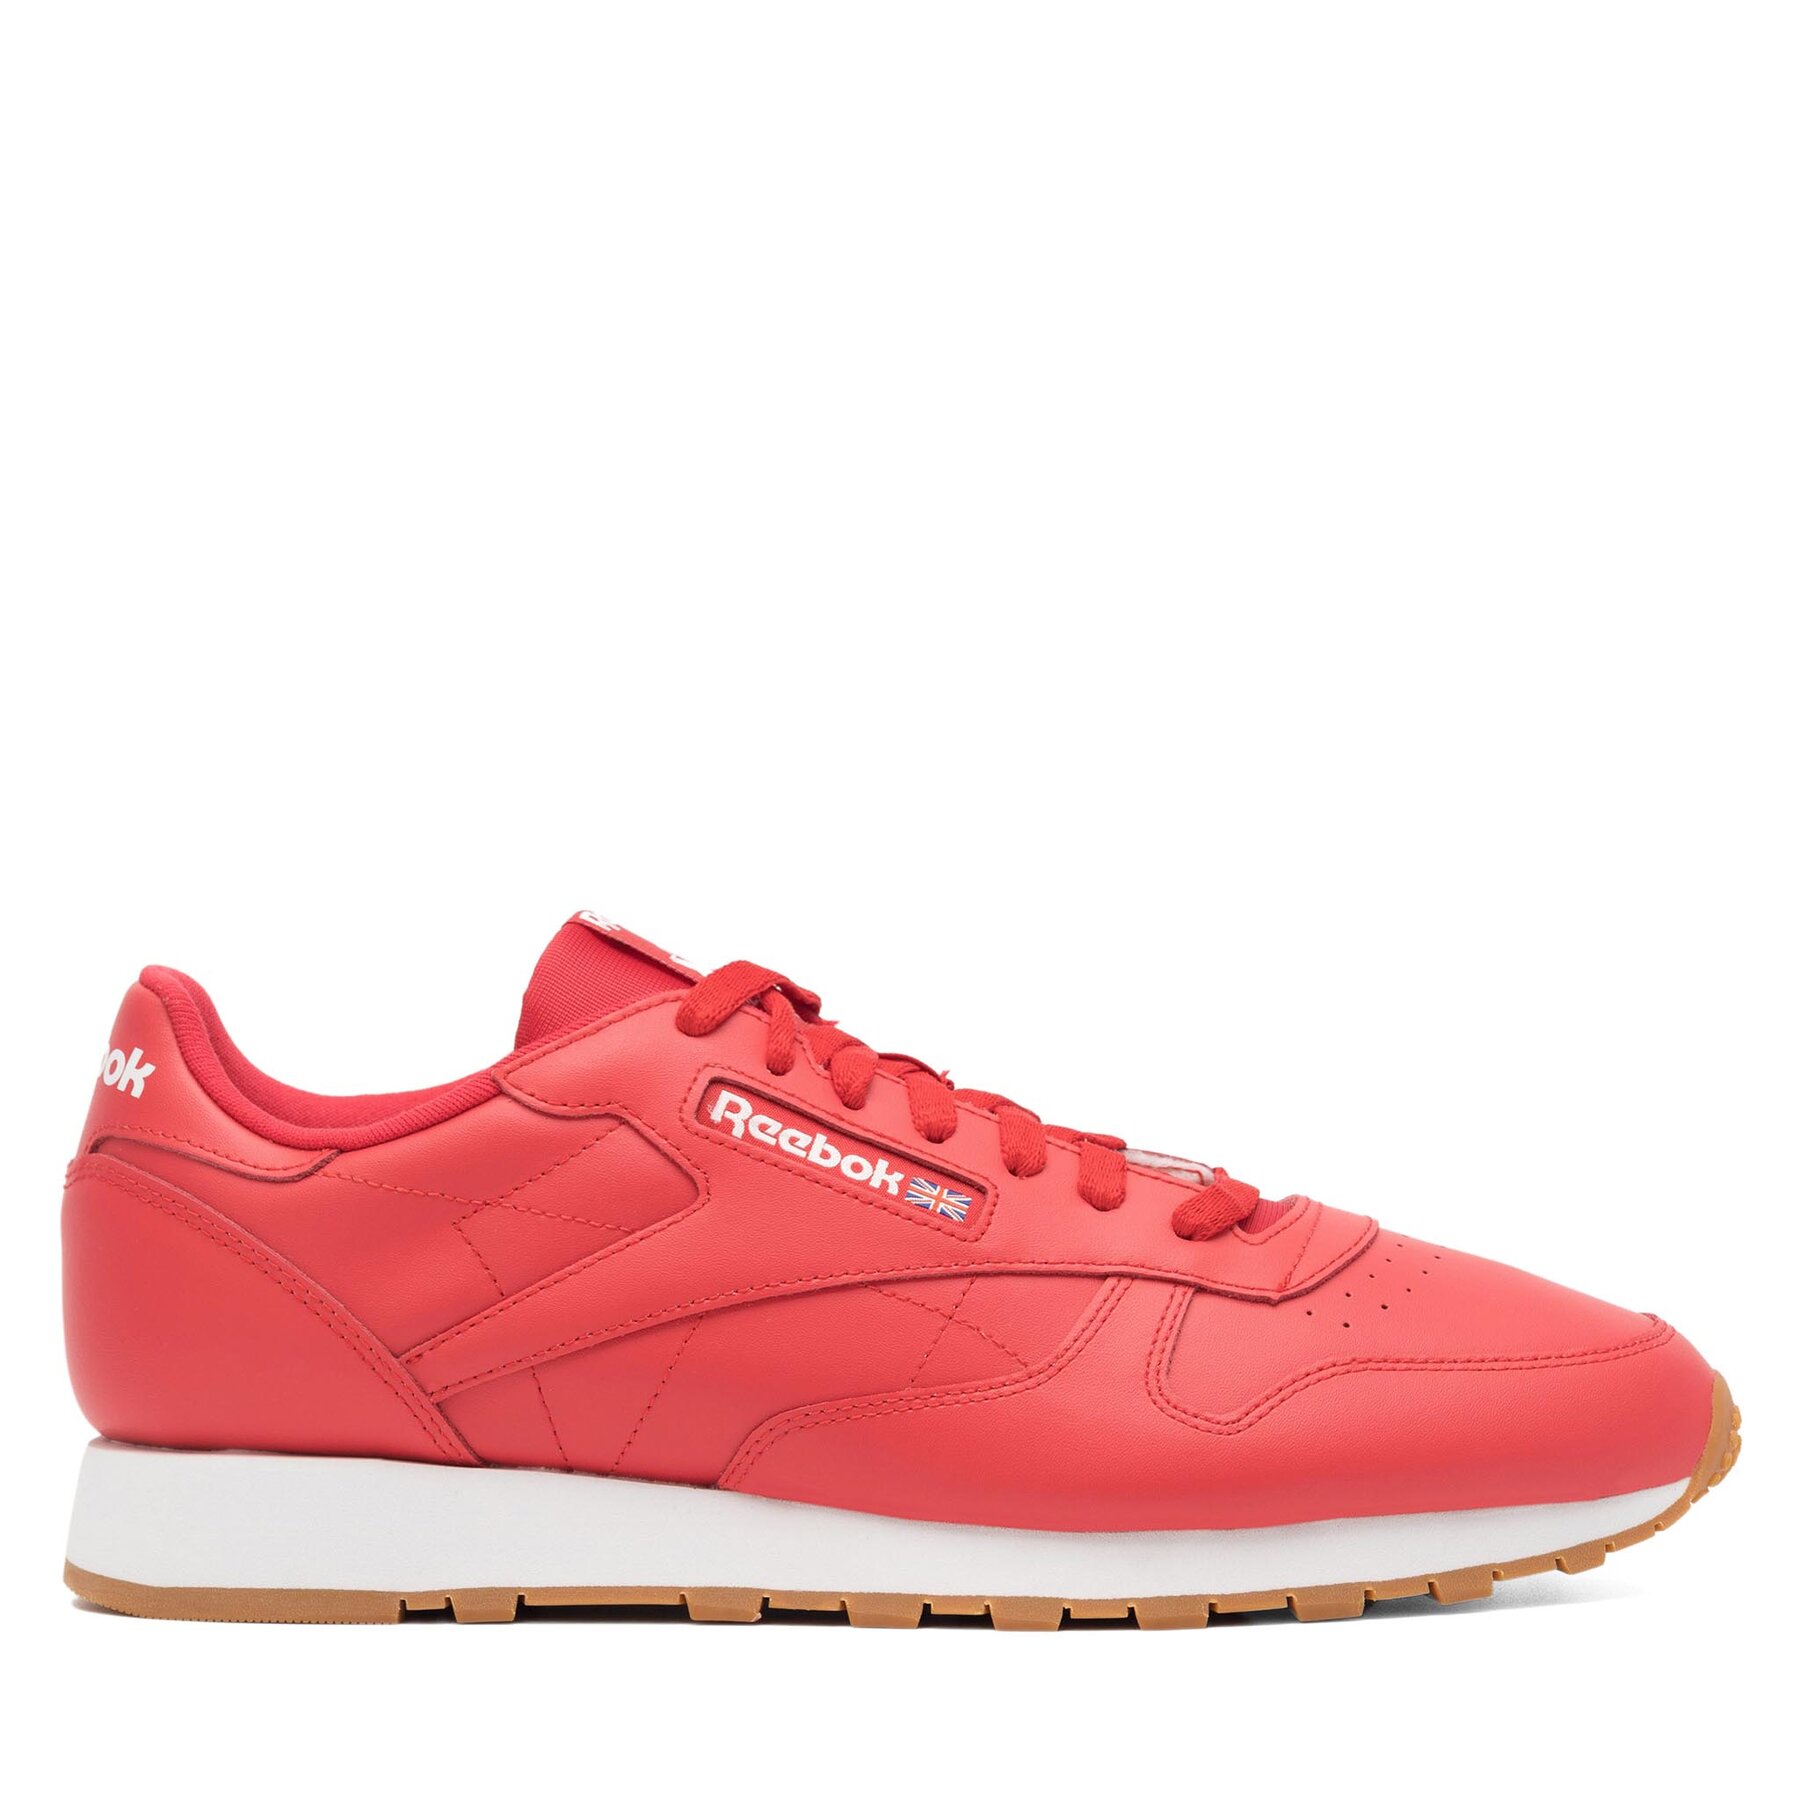 Sneakers Reebok Classic Leather GY3601 Rot von Reebok